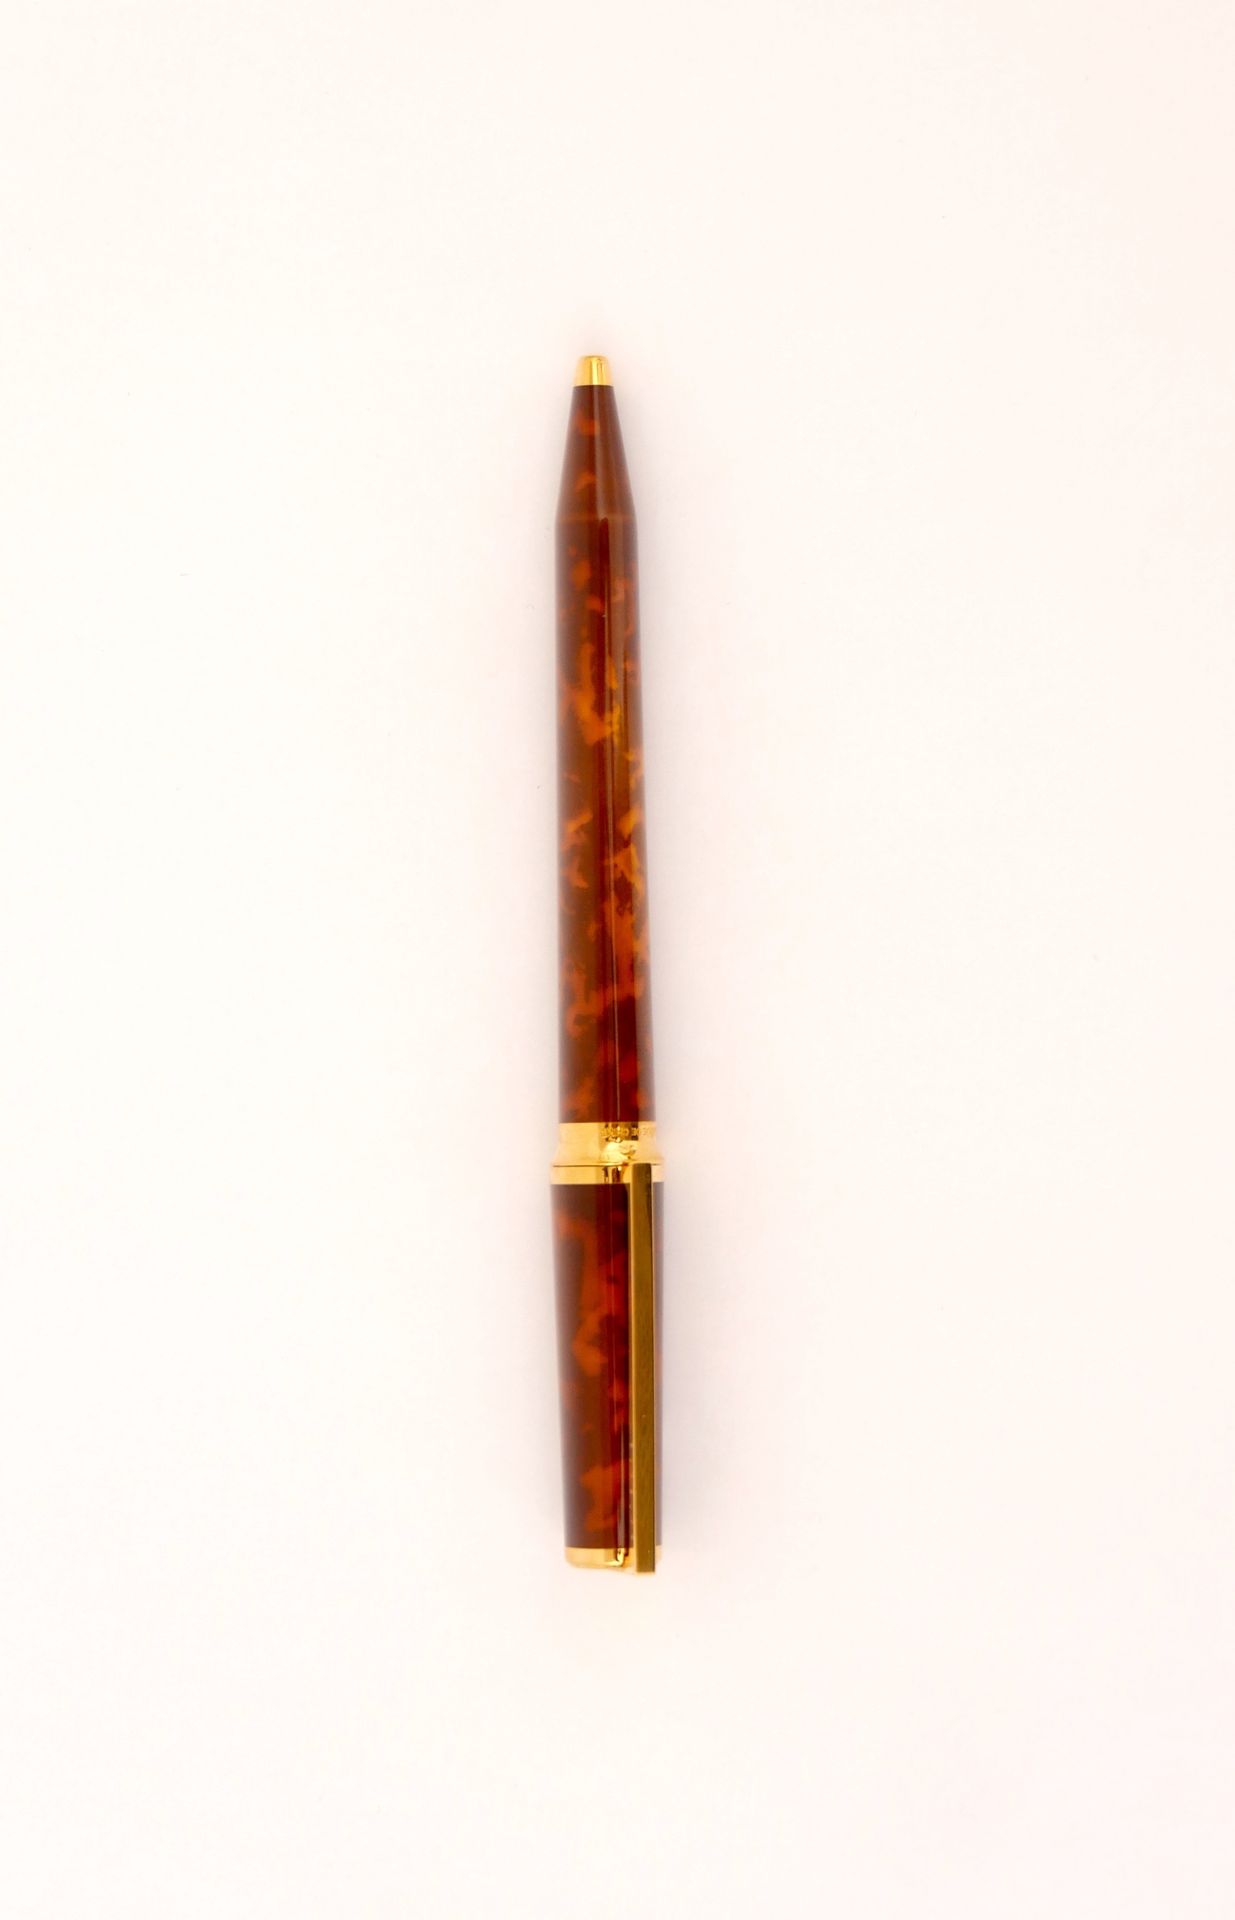 Null S.T. DUPONT 

Montparnasse 

Ballpoint pen in gilded metal and Chinese lacq&hellip;